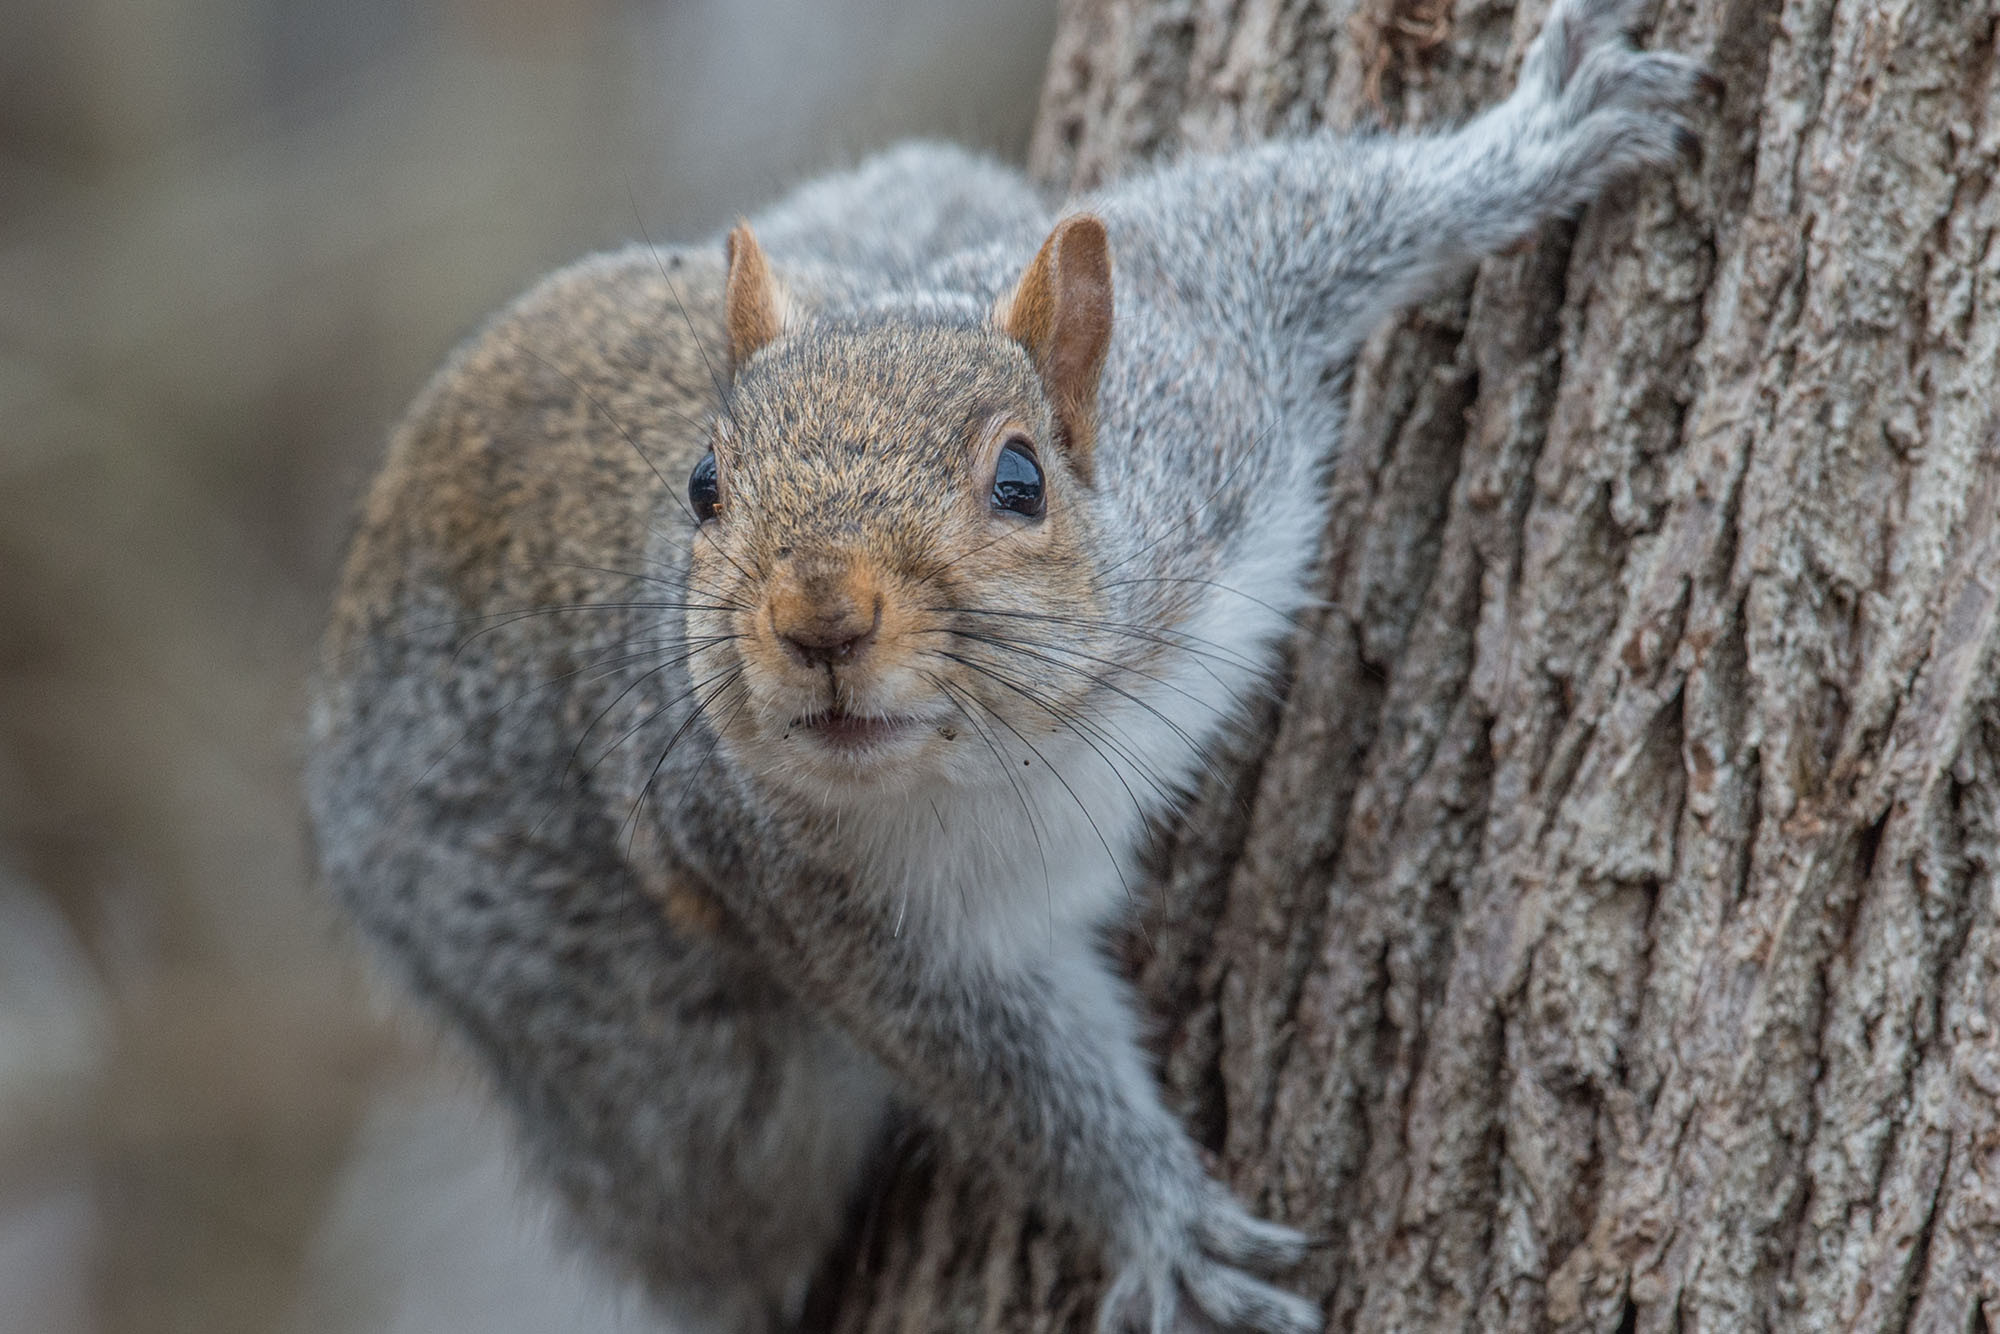 Crazed squirrel goes on biting rampage in Prospect Park